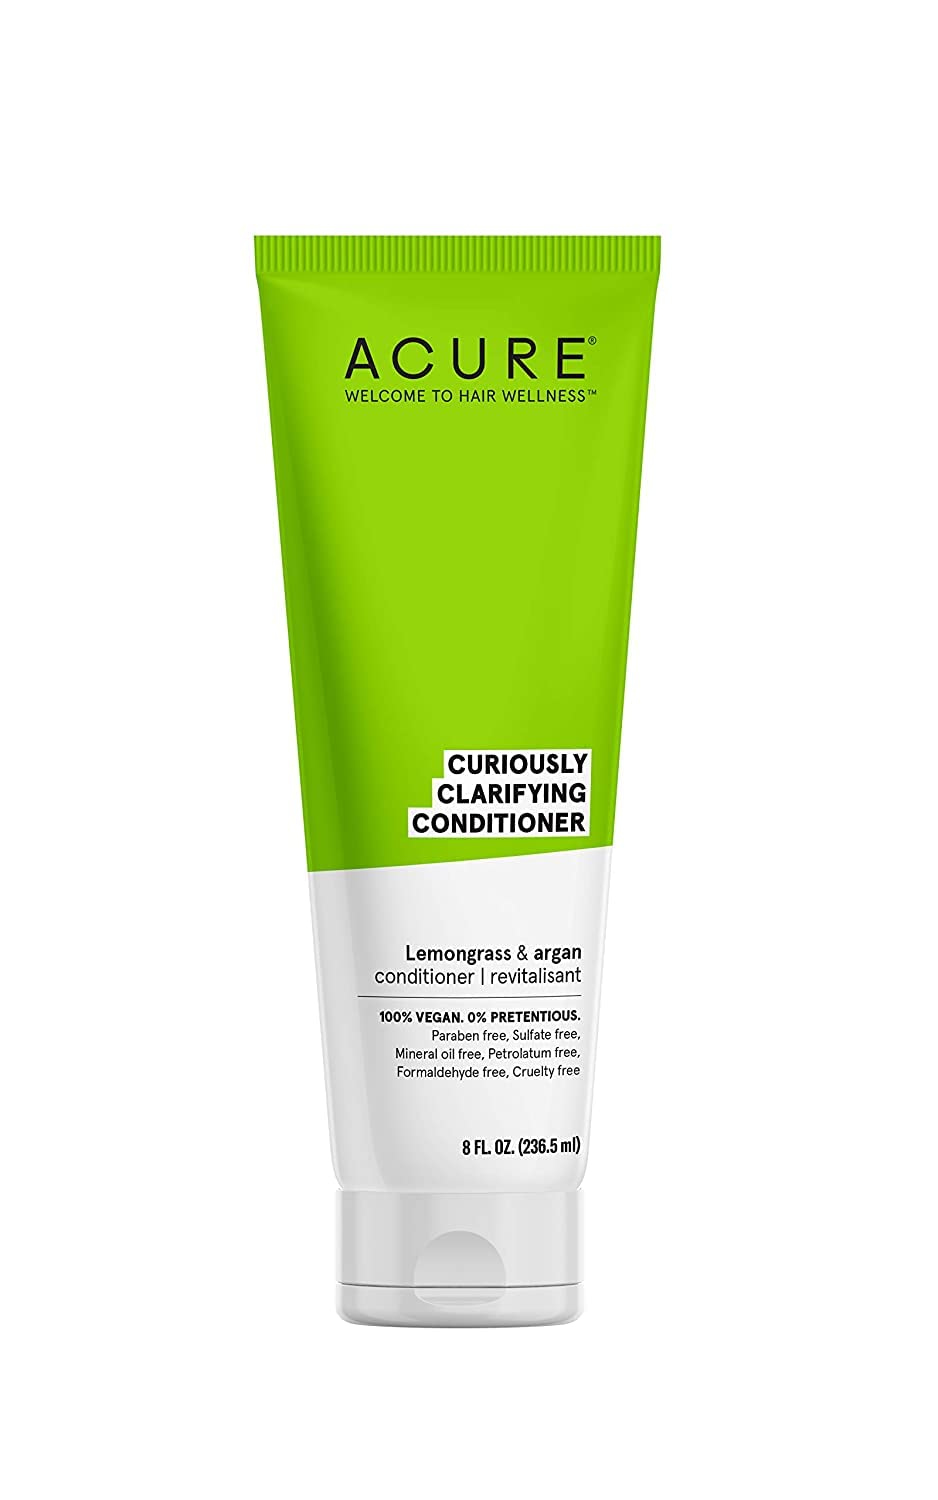 [Australia] - Acure Curiously Clarifying Conditioner & Argan Gently Cleanses, Removes Buildup, Boost Shine & Replenishes Moisture Lemongrass 8 Fl Oz 